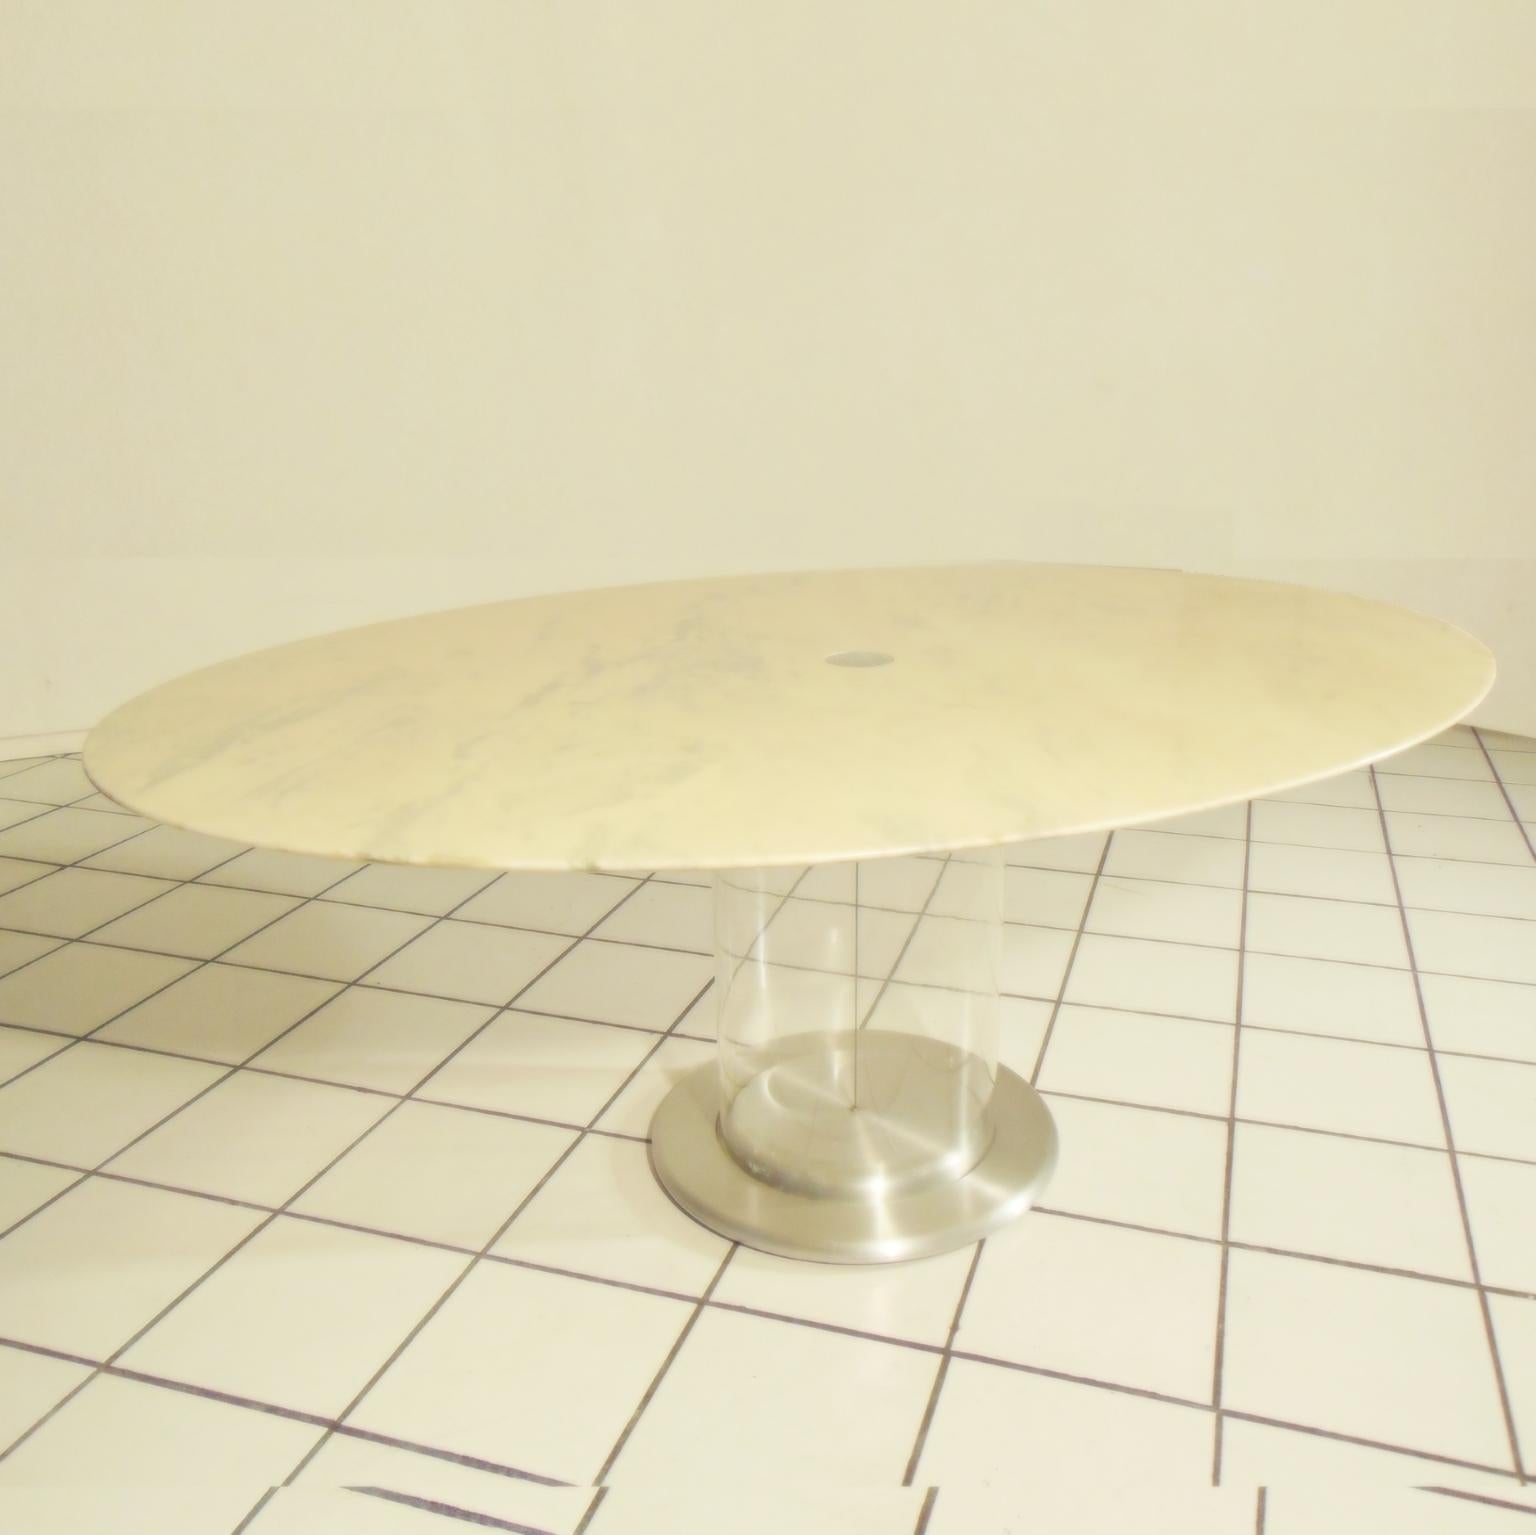 Space Age 1970s Dining Table, White Marble, Lucite Base Claudio Salocchi for Sormani Italy